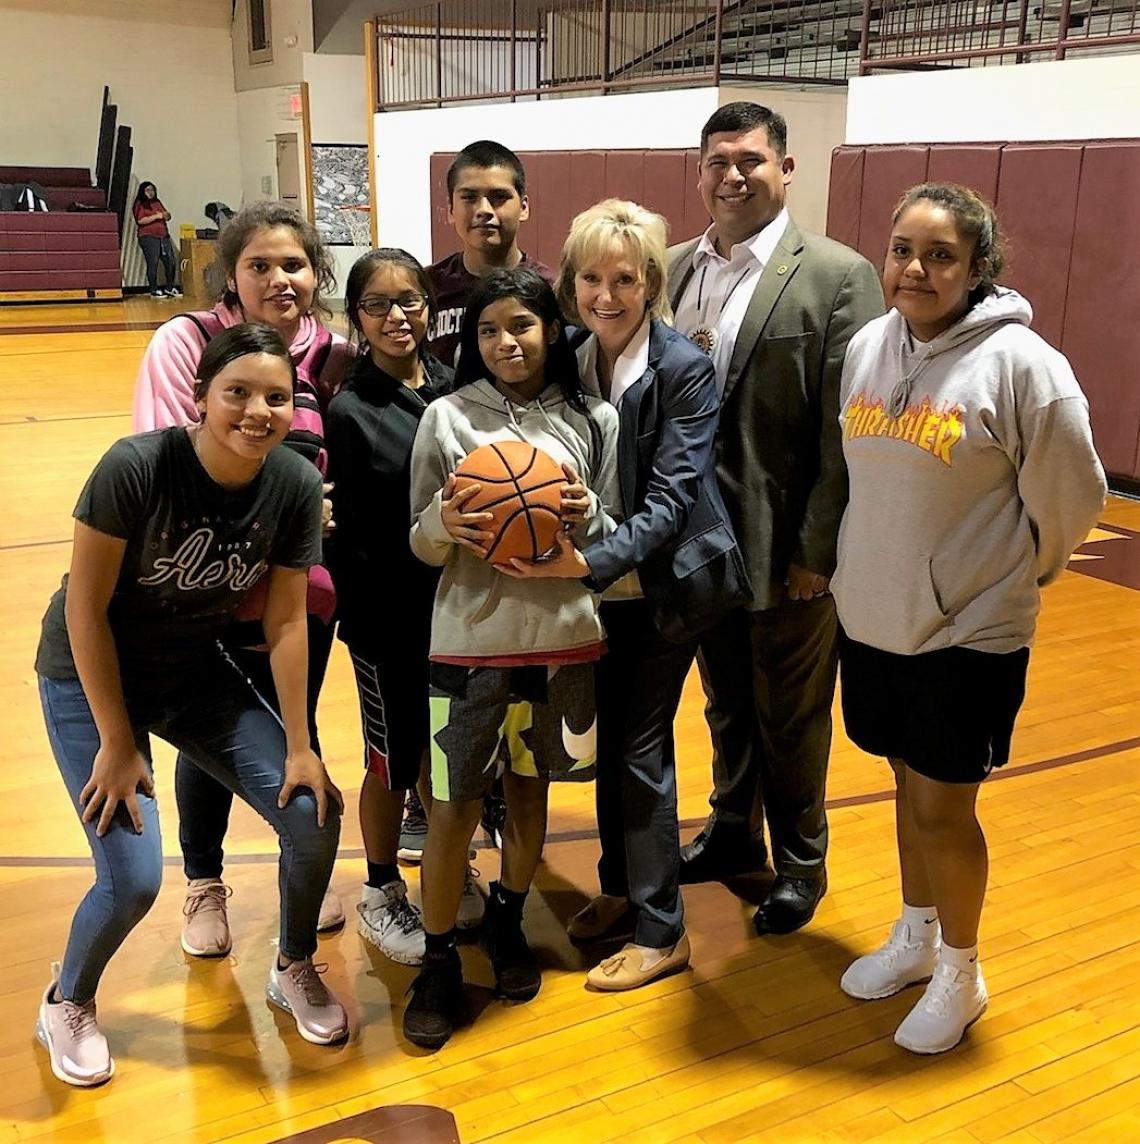 Senator Hyde-Smith visits with students from Choctaw Central High School in Choctaw, MS. (Aug. 23, 2019)